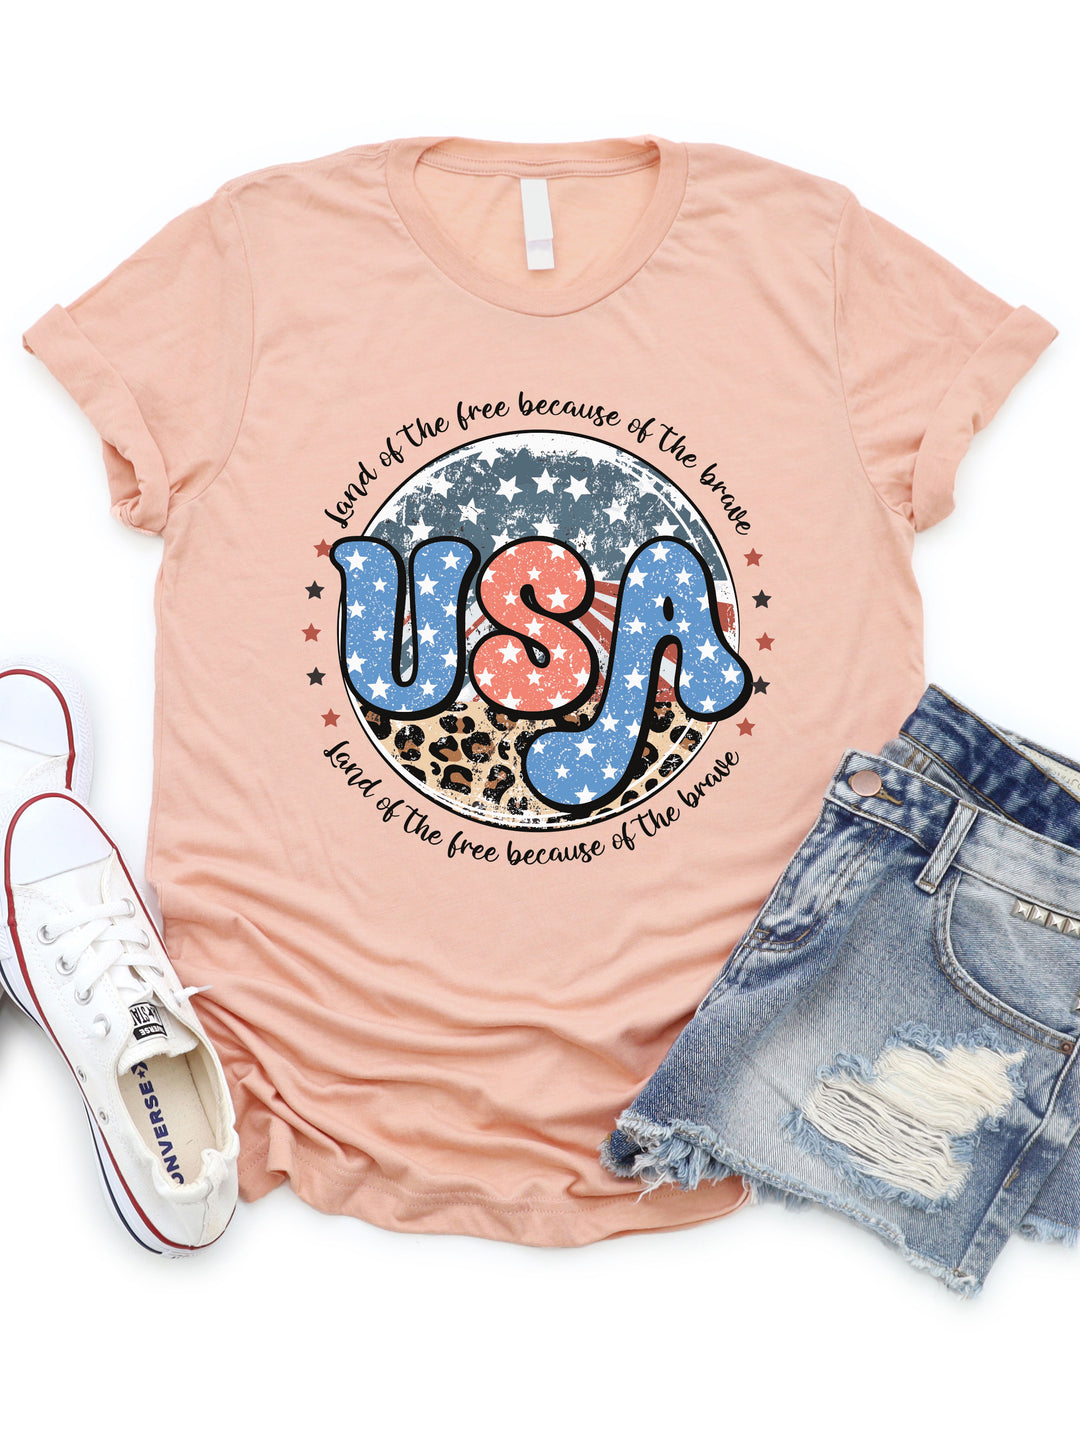 Land of the Free USA Graphic Tee